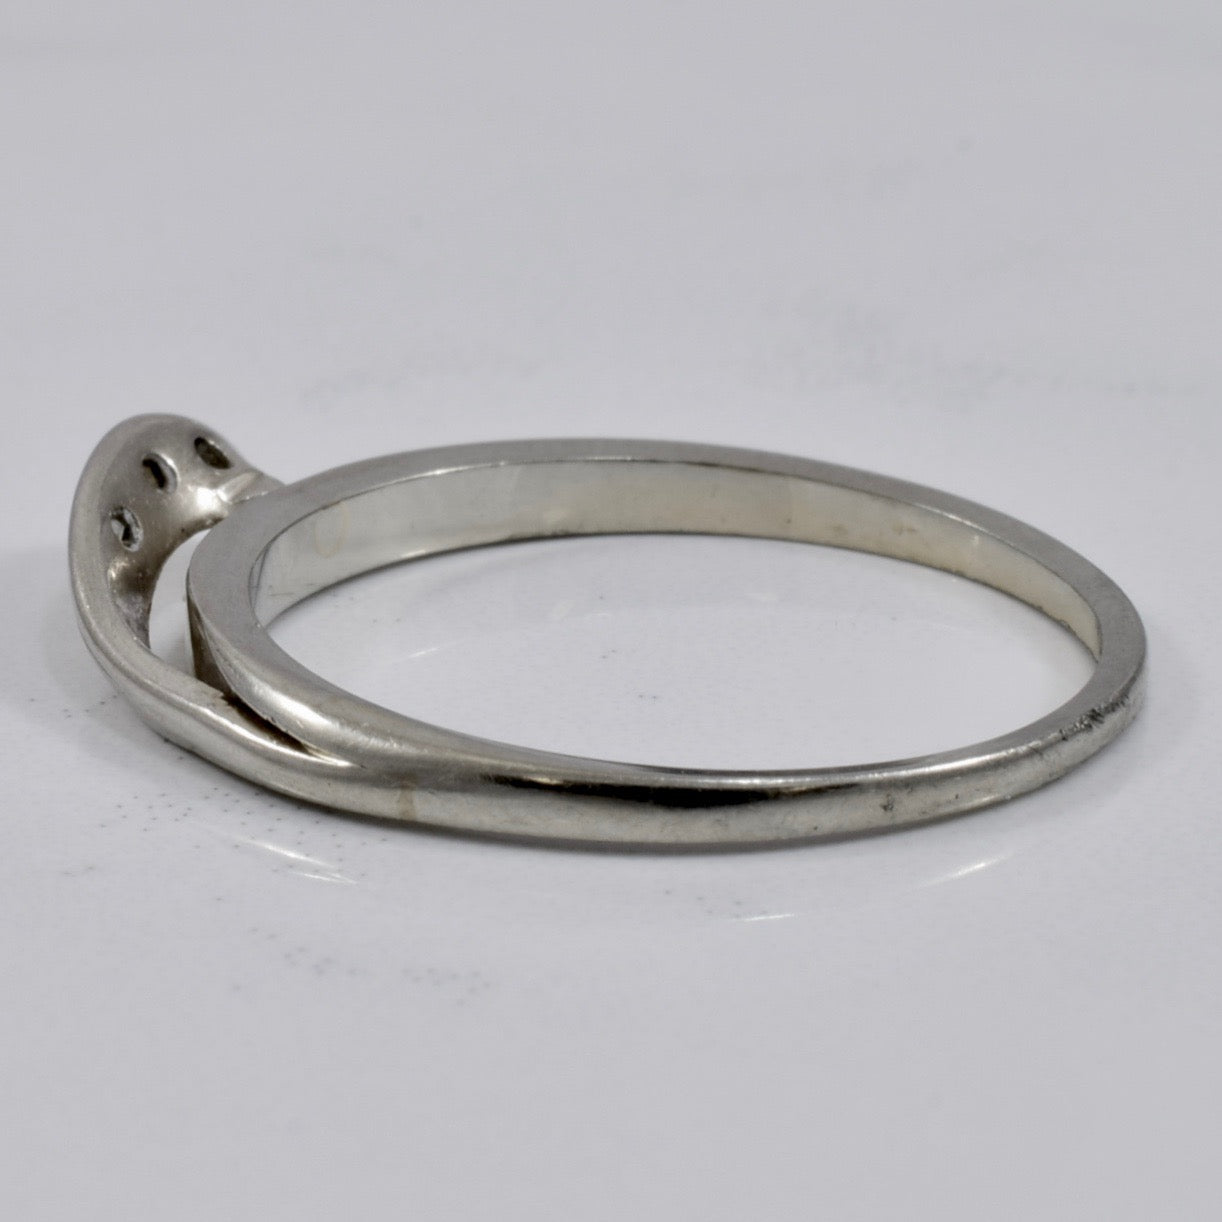 Dainty White Gold and Diamond Ring | 0.03 ctw SZ 7.5 |